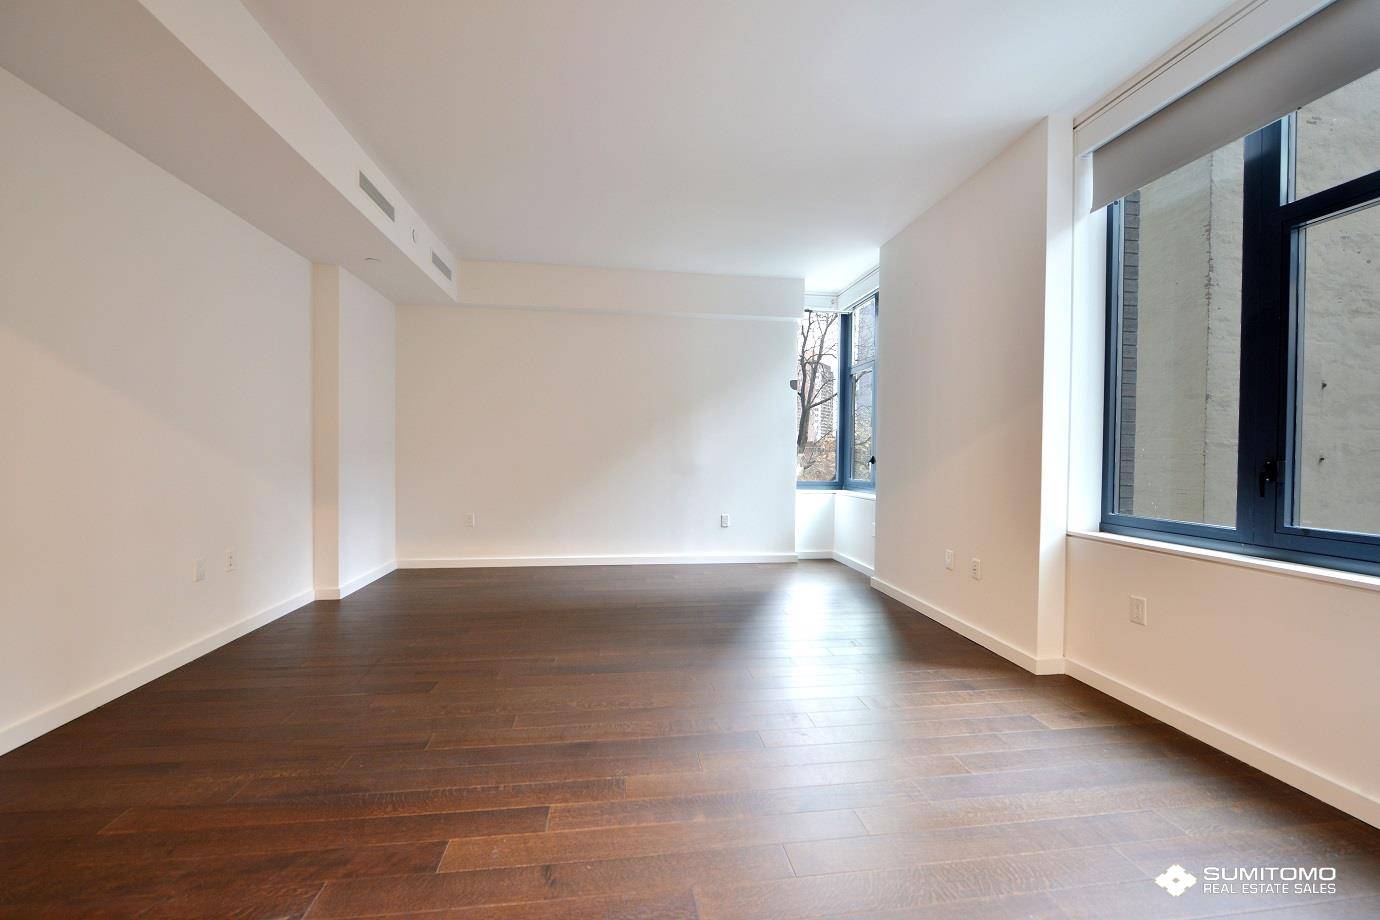 MODERN COZY STUDIO IN MIDTOWN EASTA stylish and peaceful apartment with open view from over sized corner window.